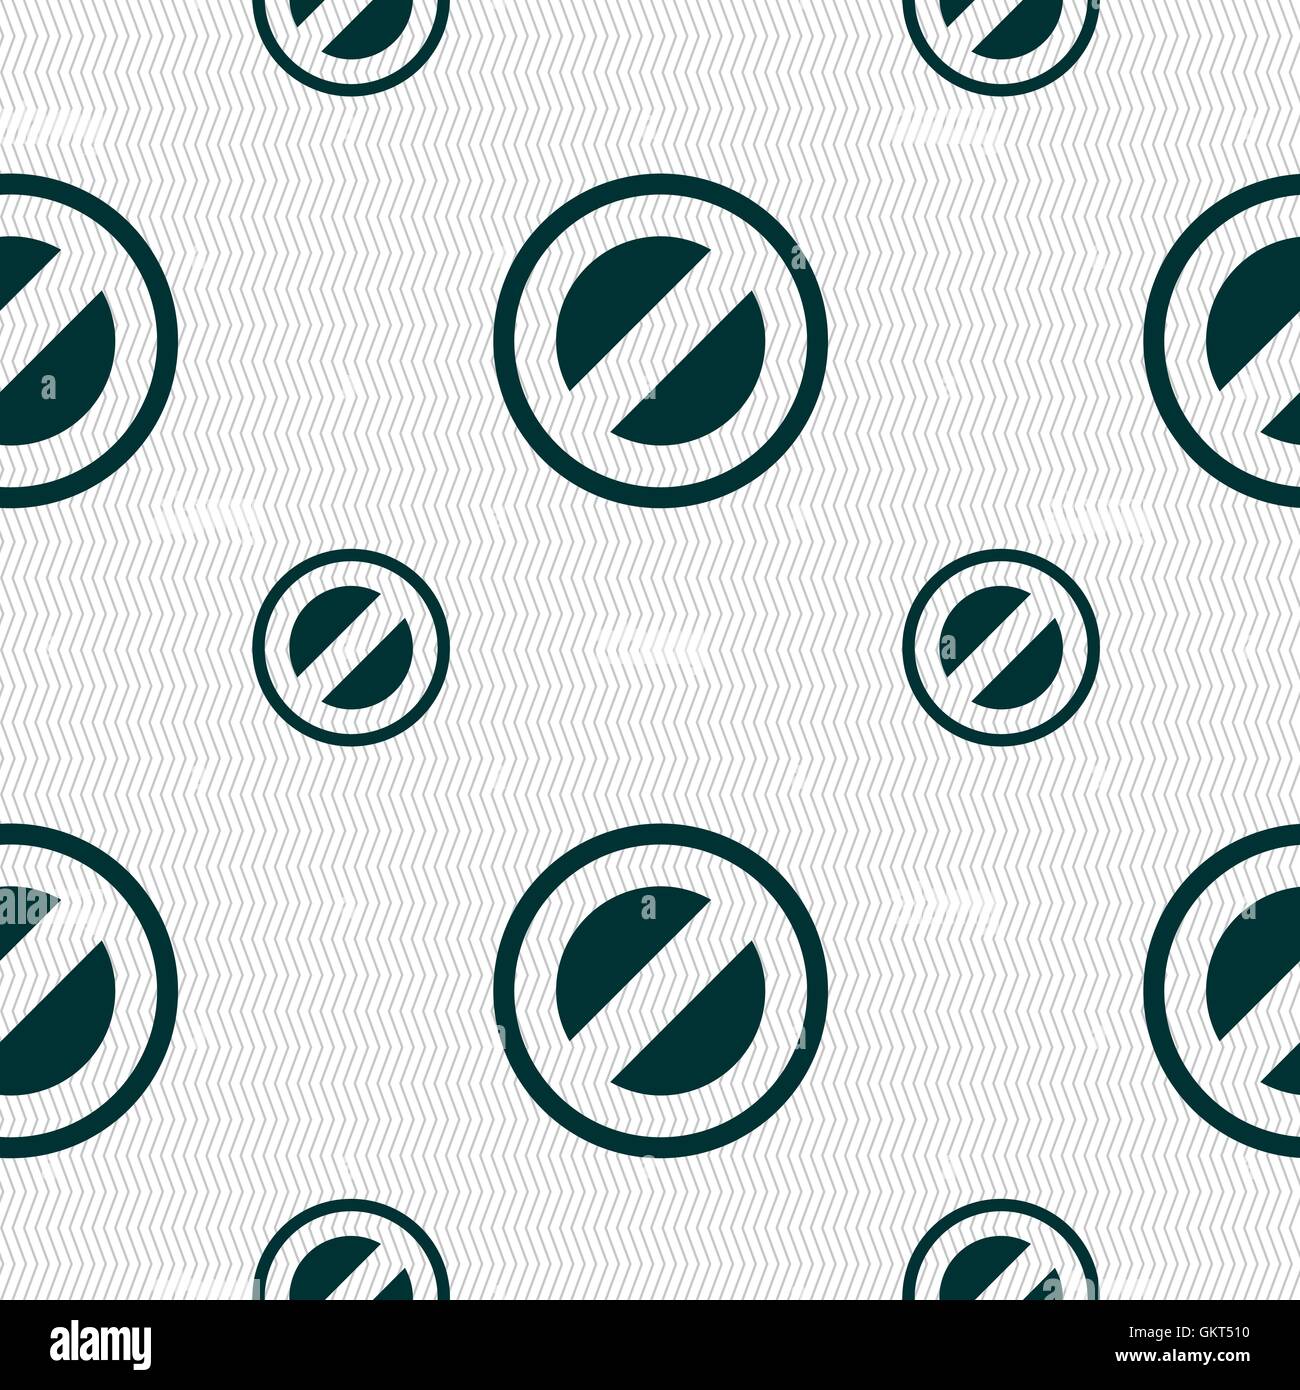 Cancel icon sign. Seamless pattern with geometric texture. Vector Stock Vector